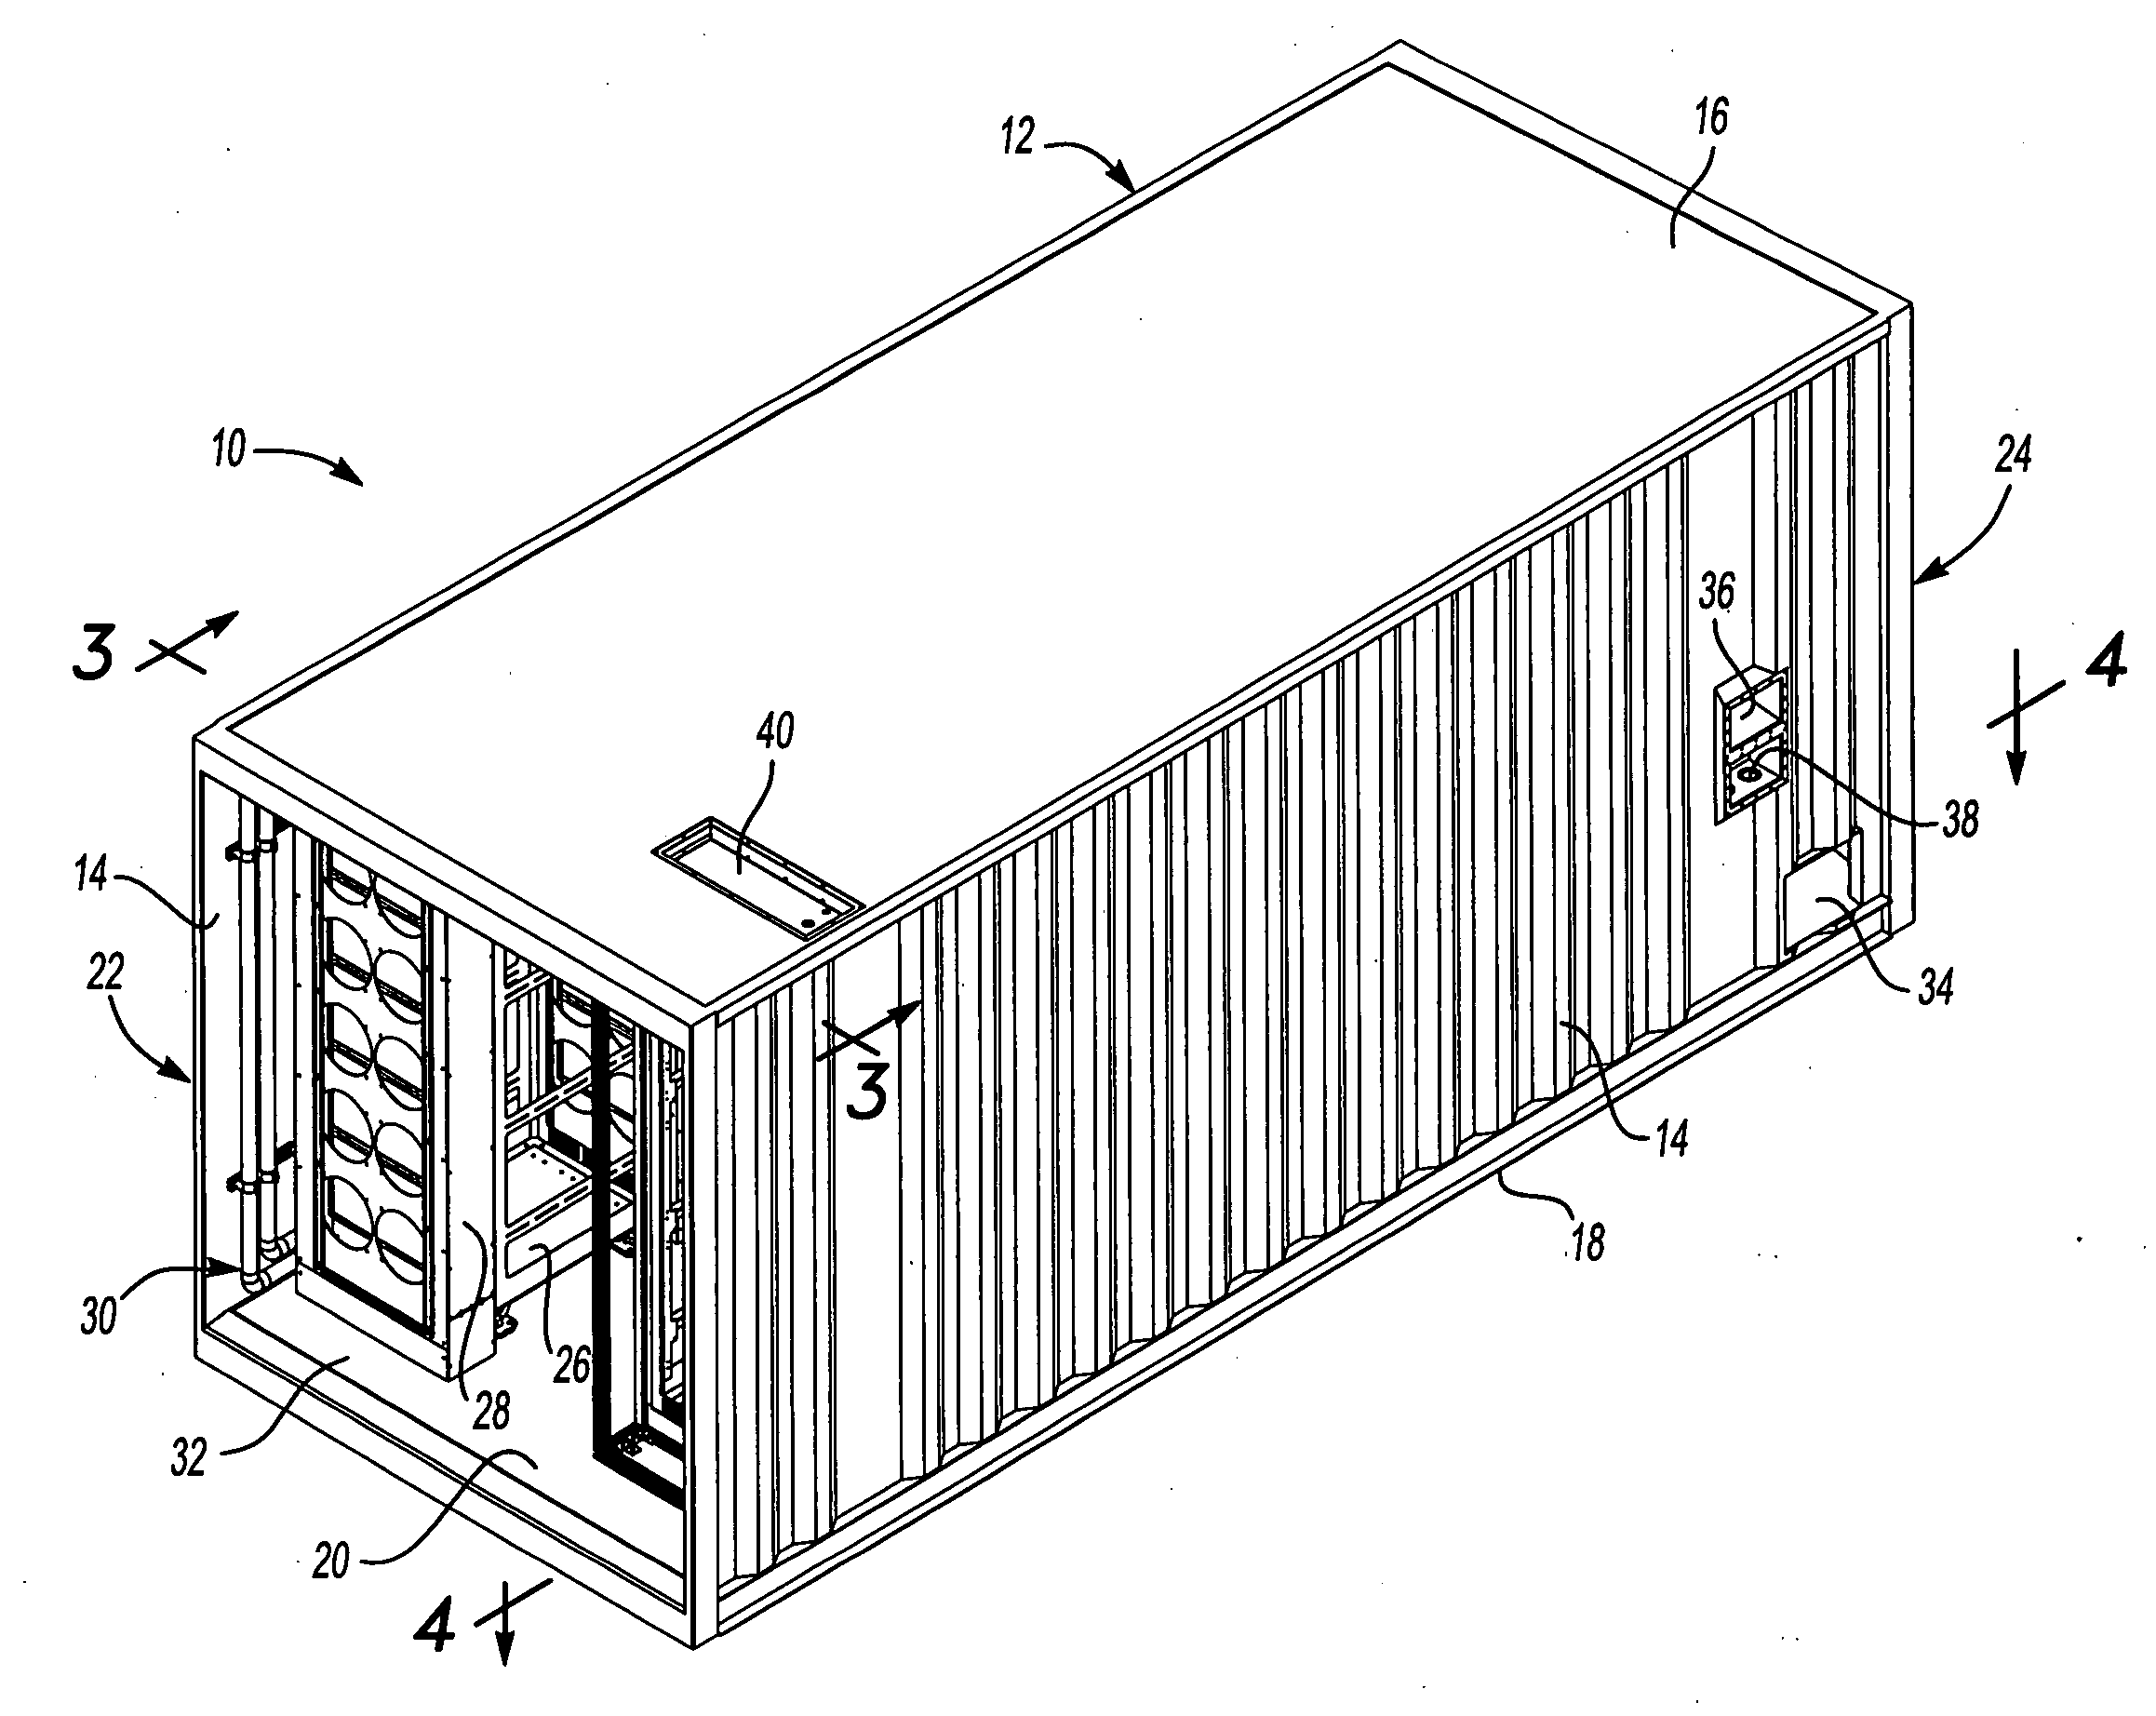 Server rack service utilities for a data center in a shipping container